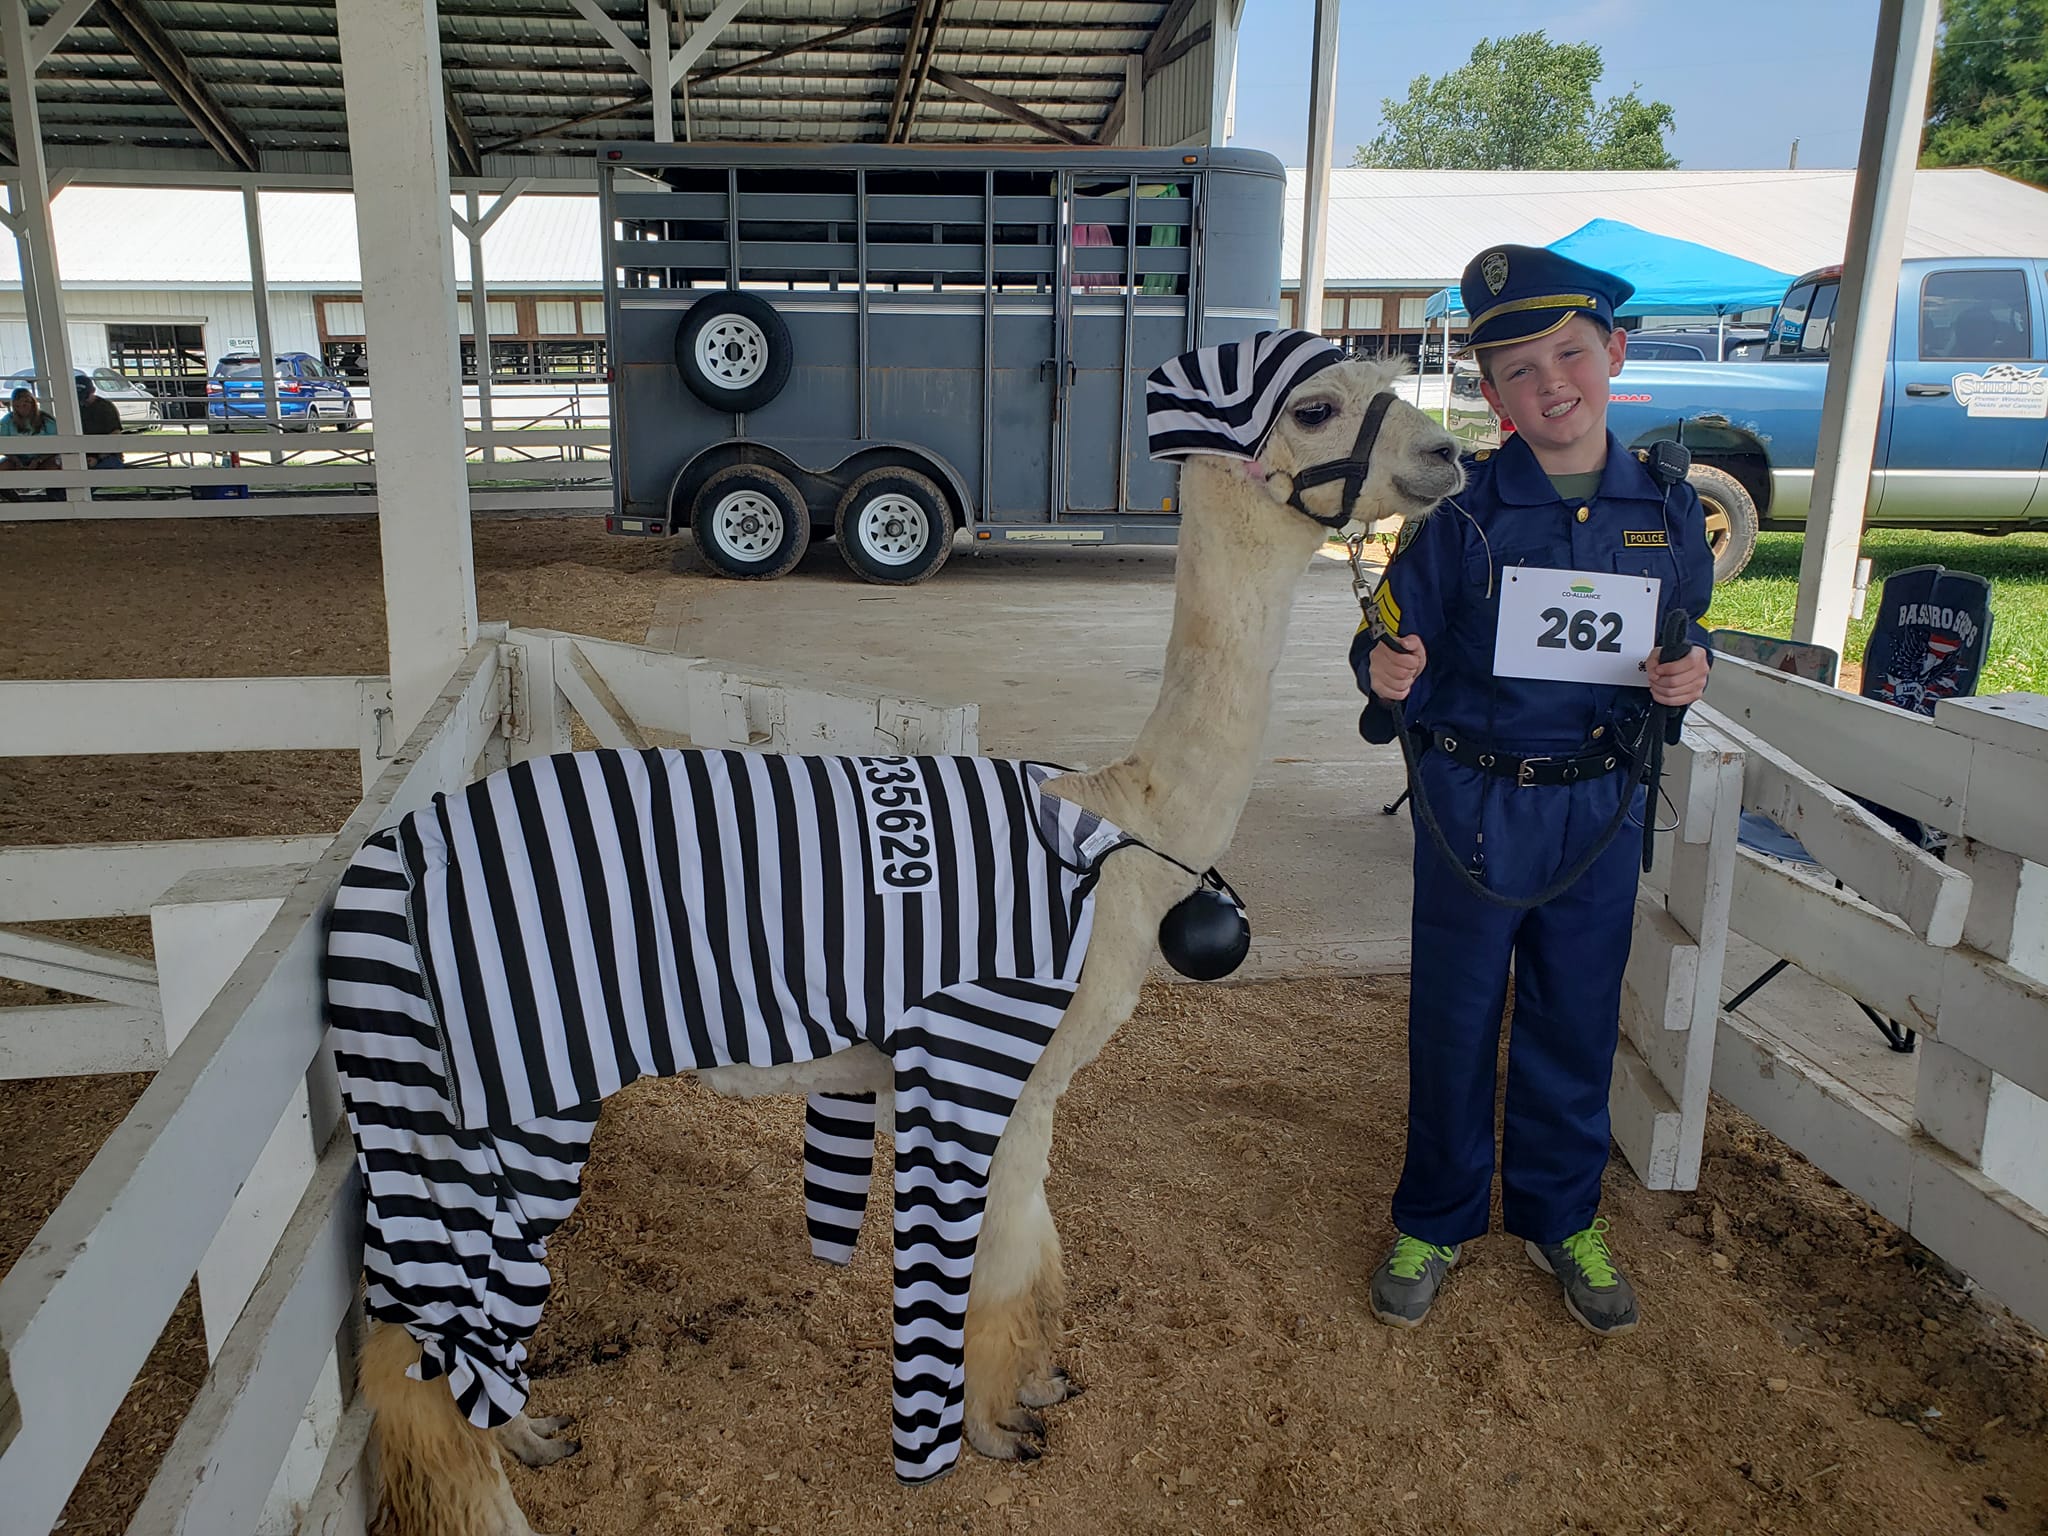 Youth dressed up as policeman stands next to his alpaca dressed up as an inmate with striped clothing.